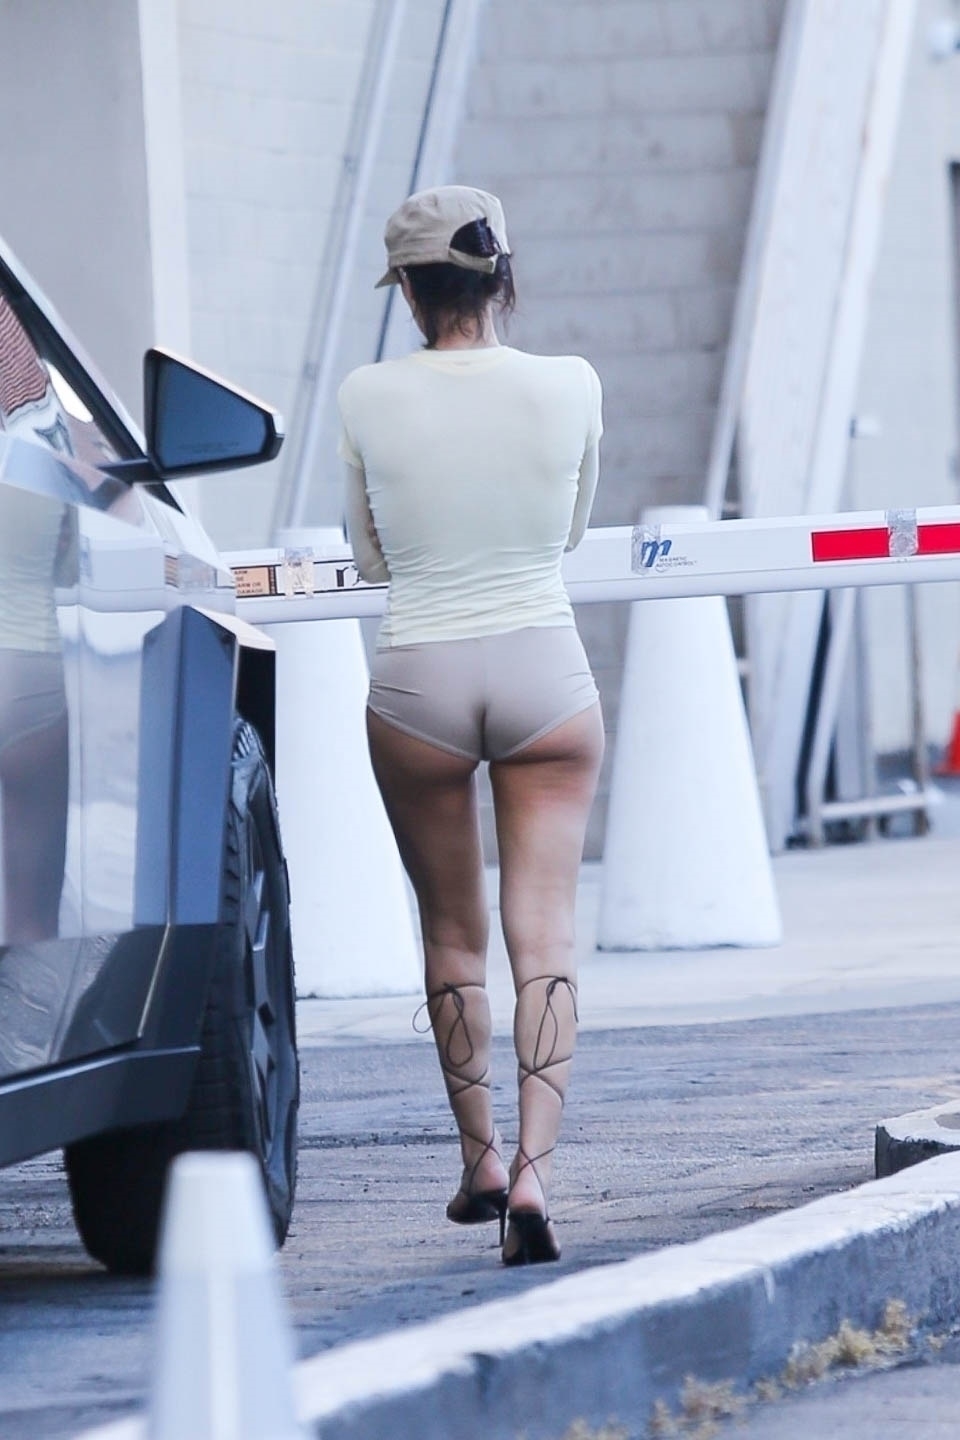 Bianca Censori wearing a long-sleeved shirt and underwear while heading into a movie theater in Los Angeles, California